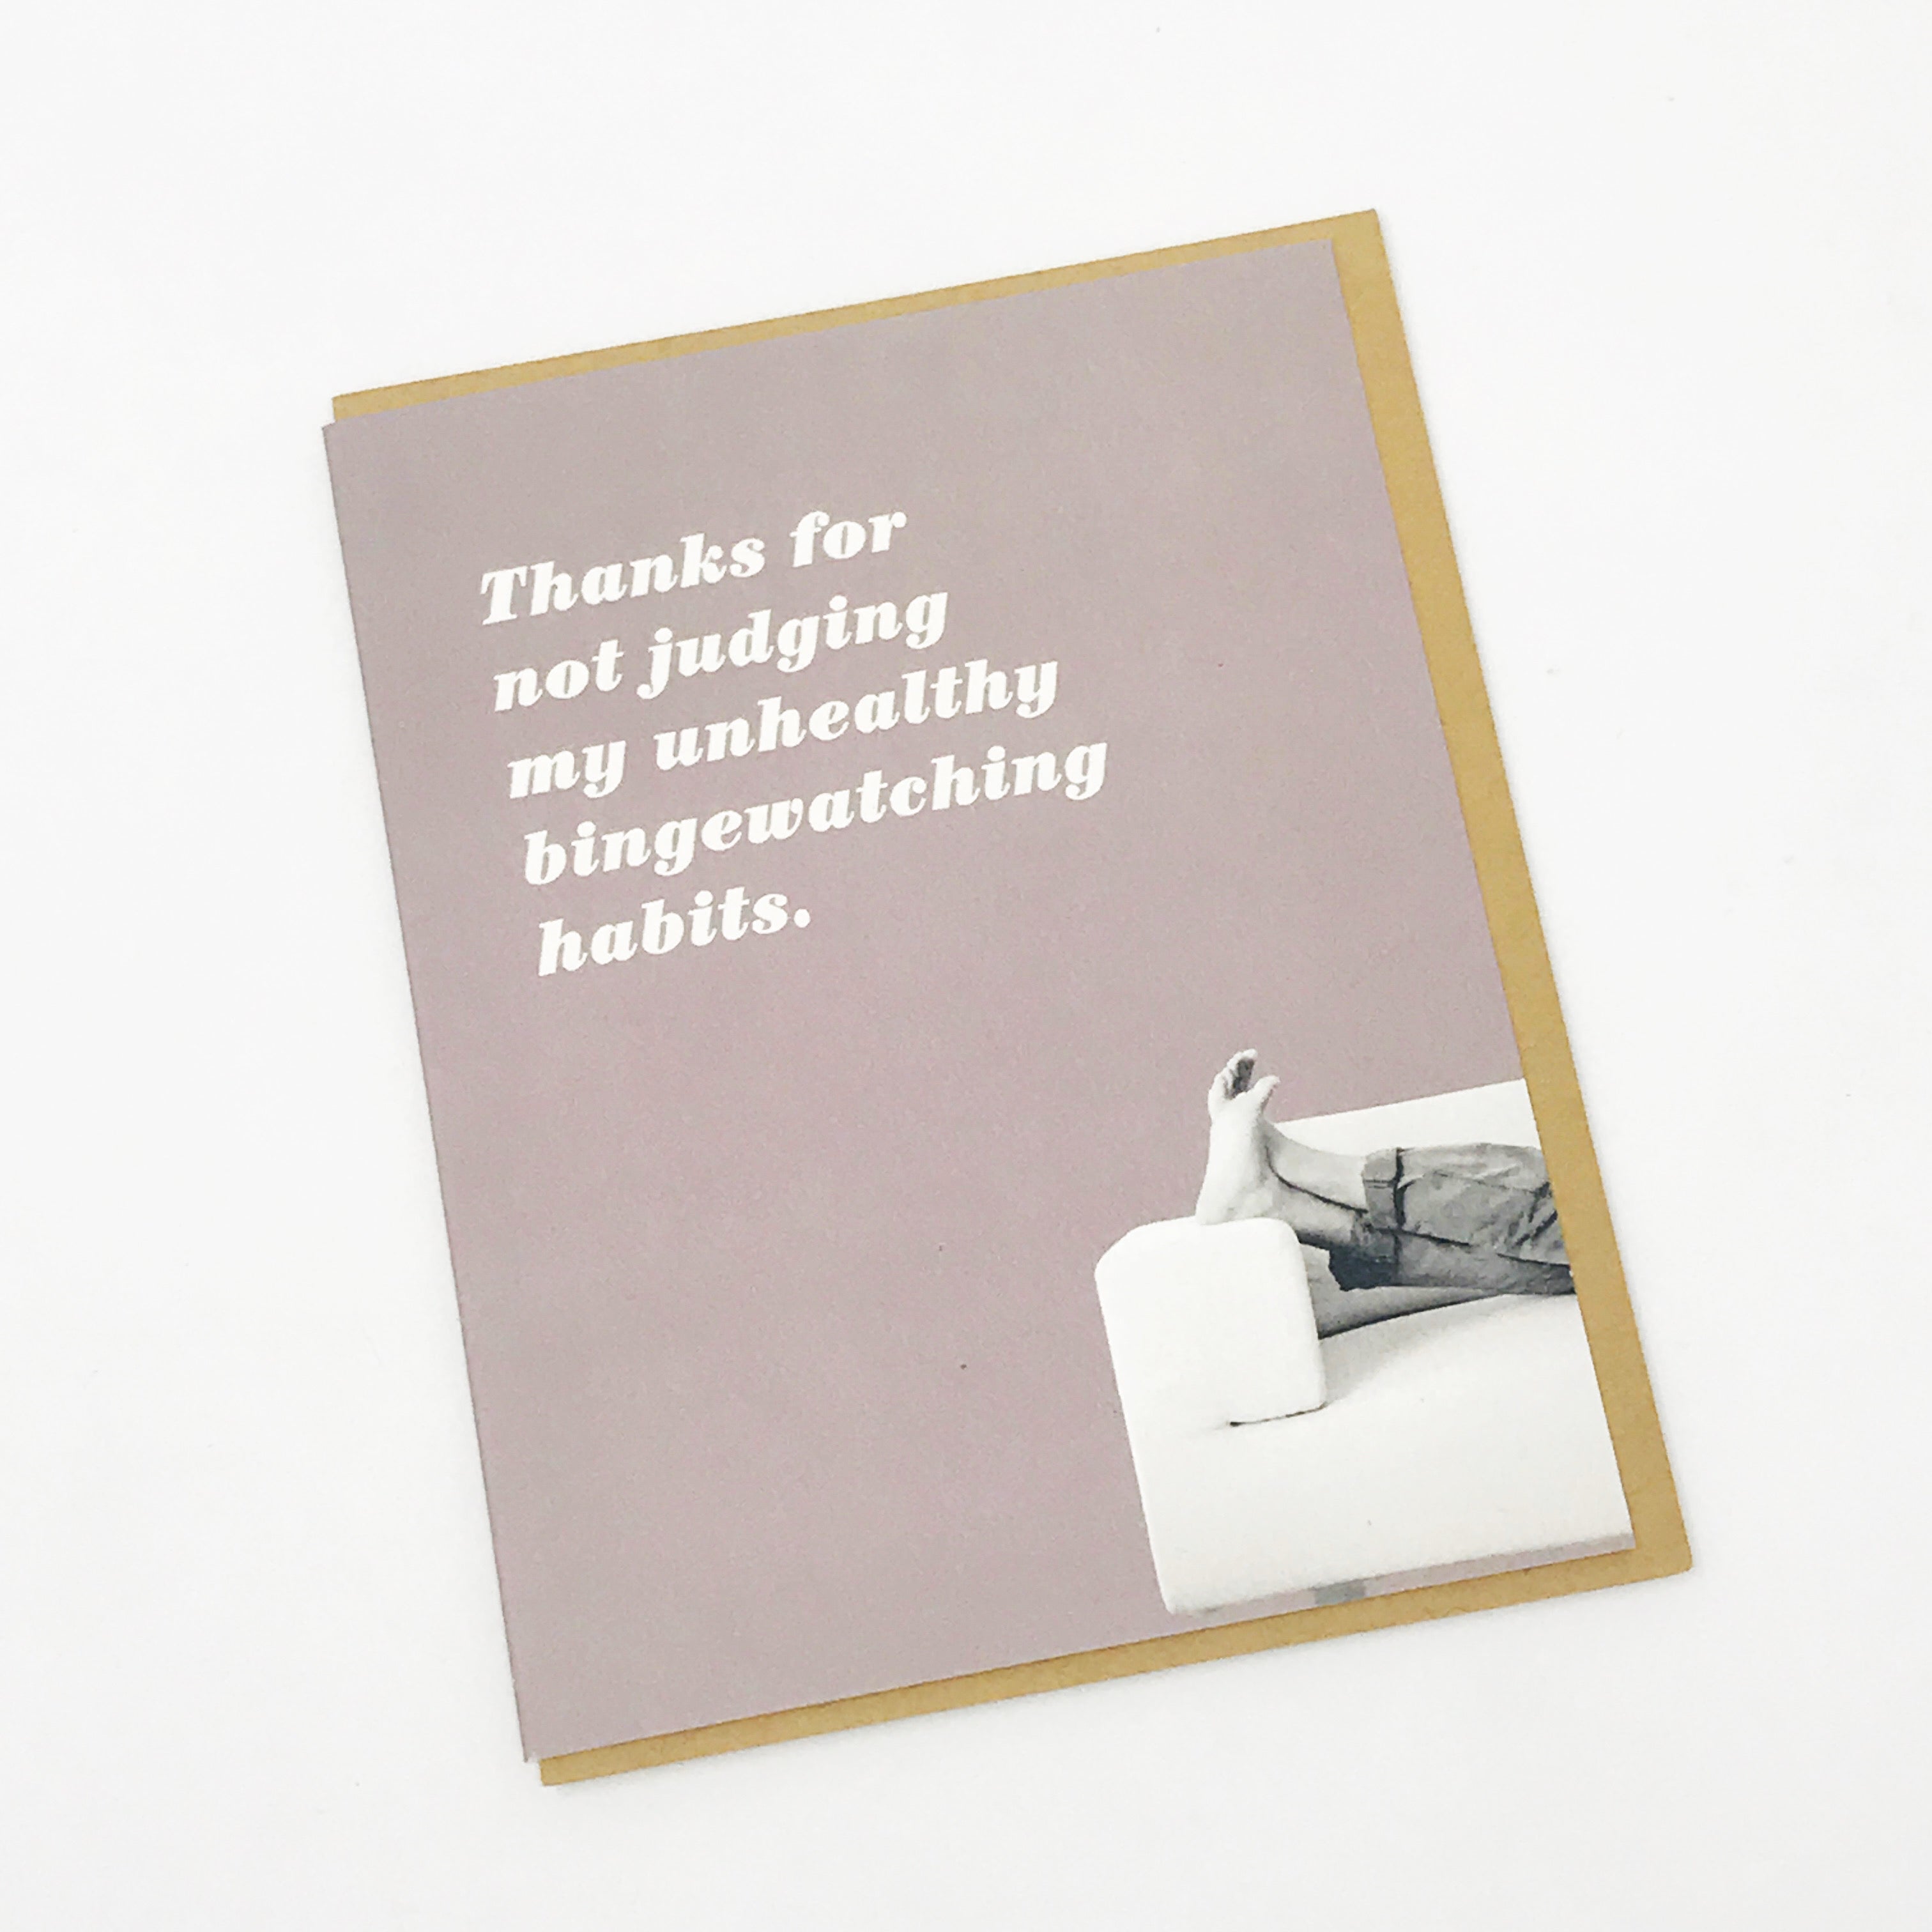 Thanks for not judging my habits greeting card